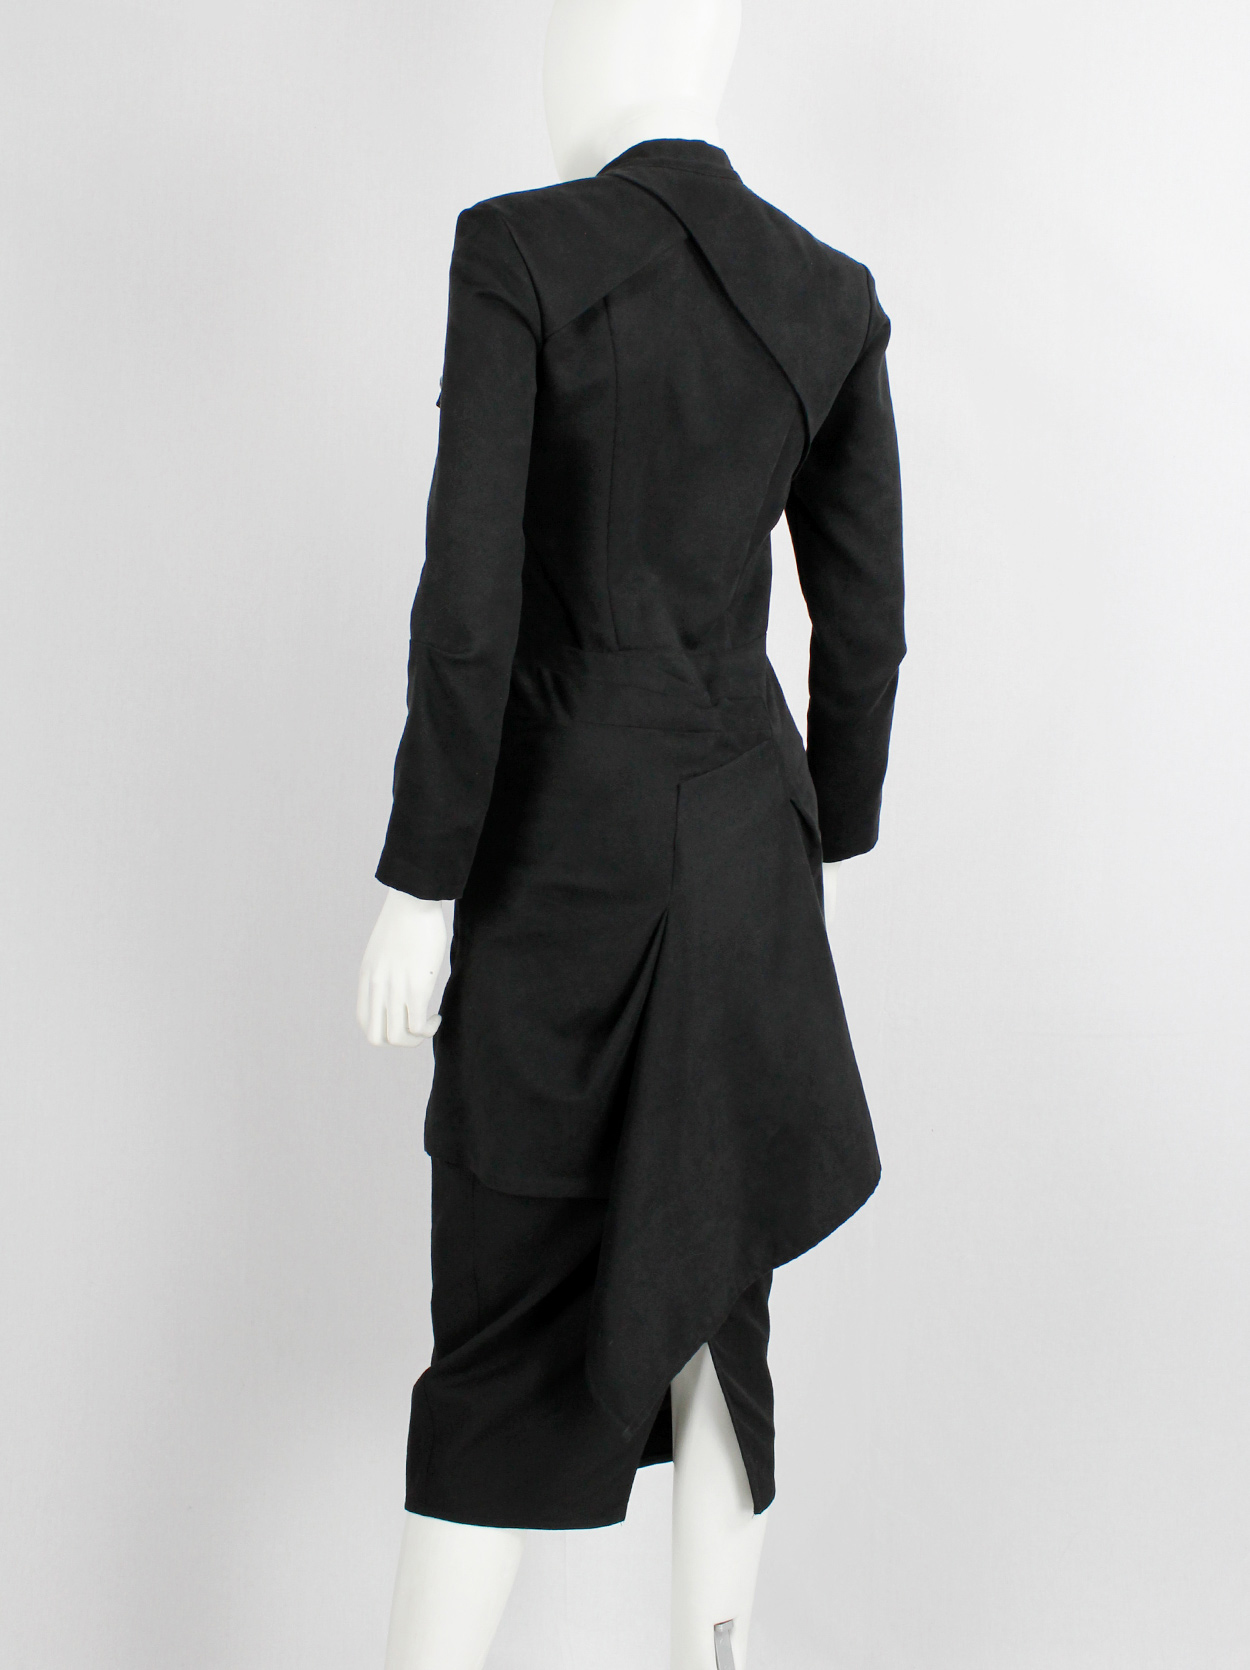 A.F. Vandevorst black long military coat or dress with silver cross ...